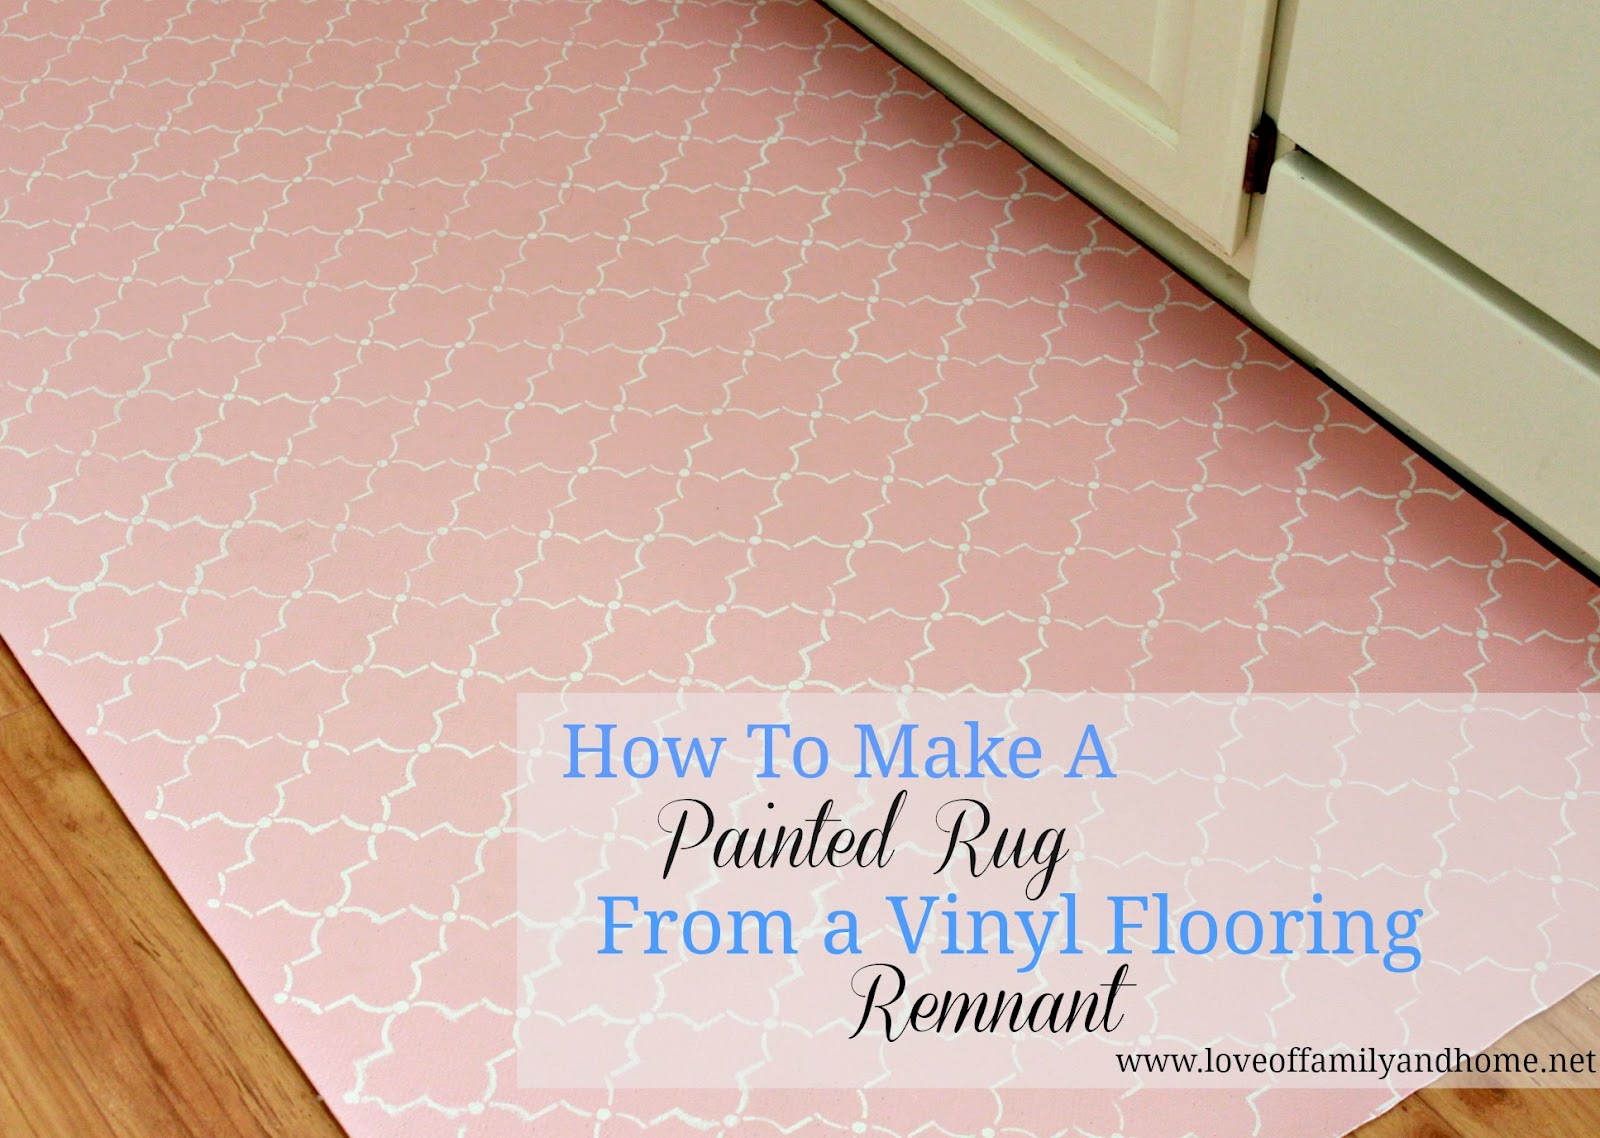 How To Paint A Rug Using Vinyl Flooring. Love of Family & Home